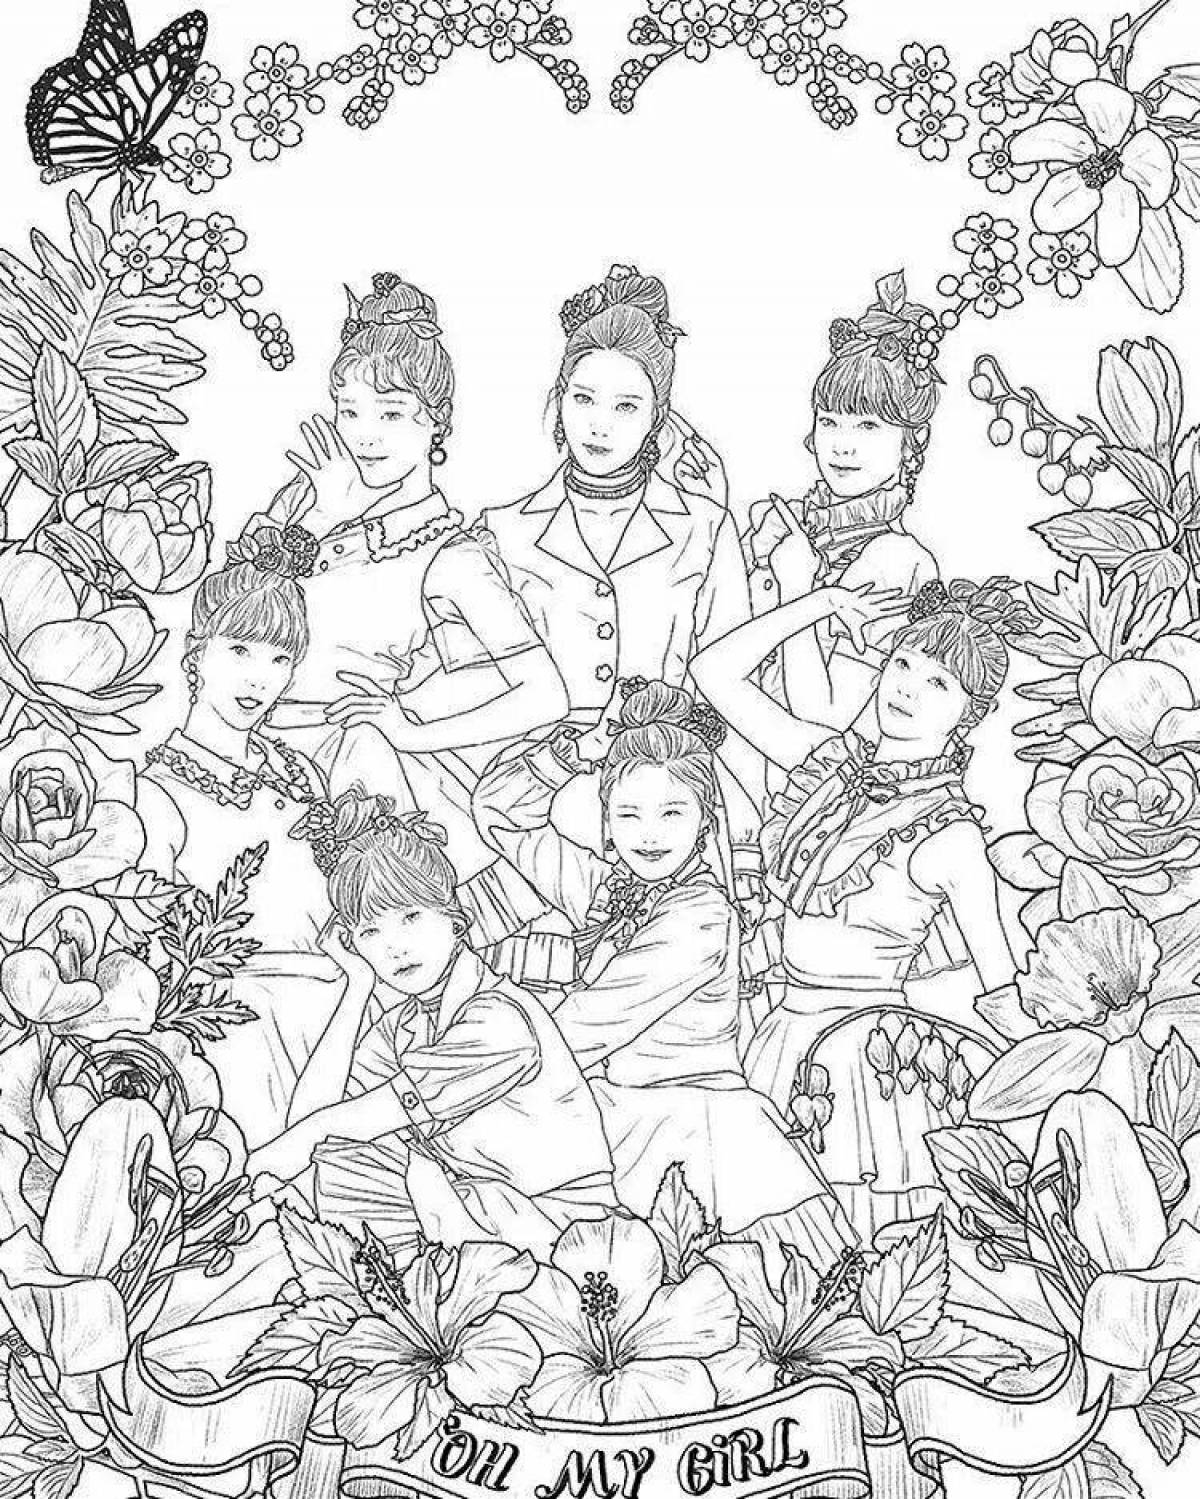 Kpop magic coloring page